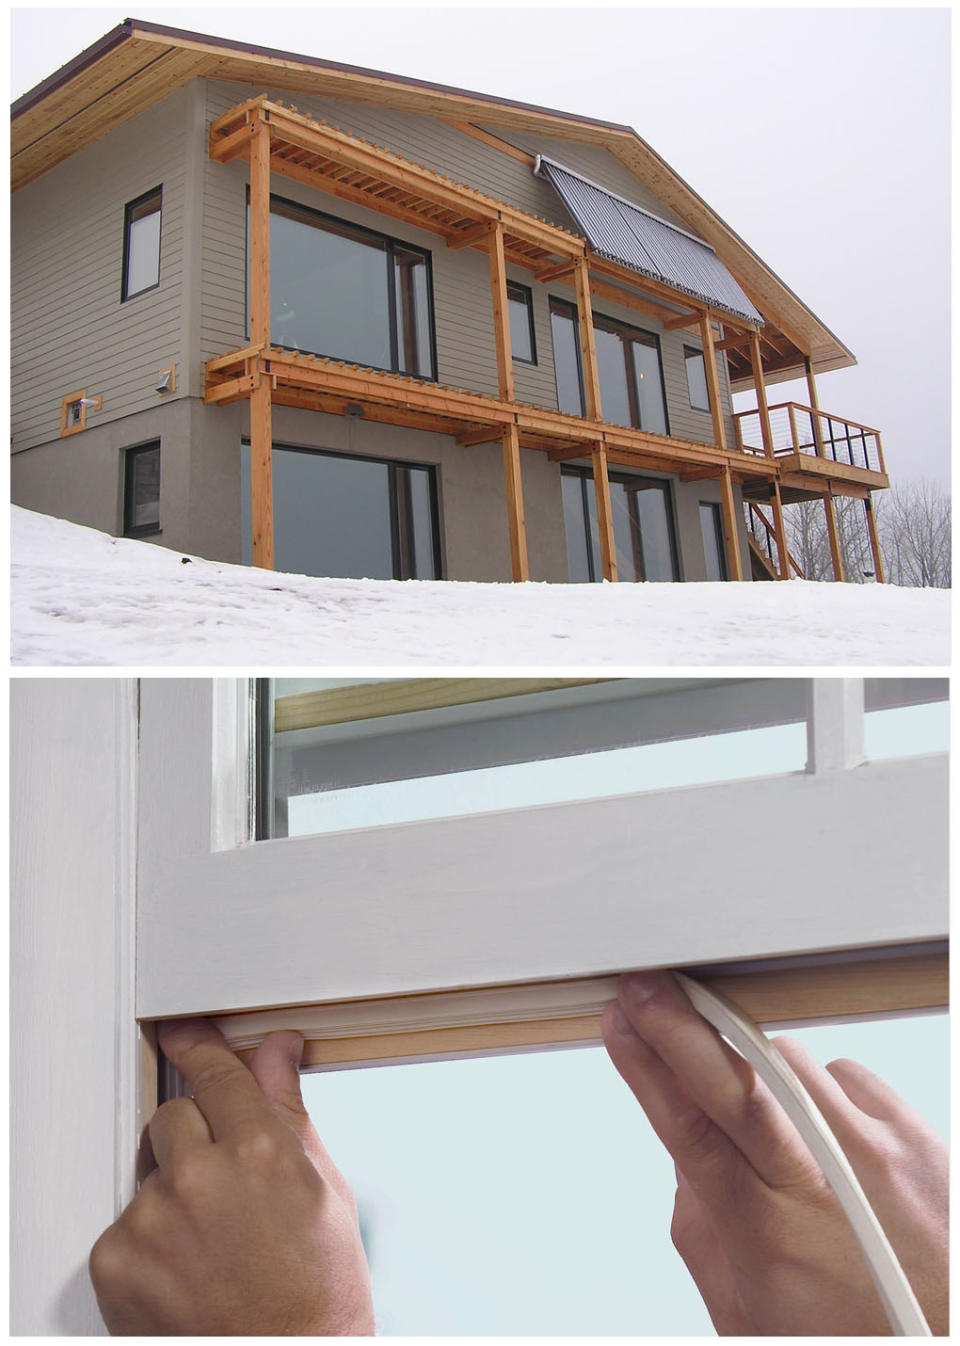 FILE -This combination of Associated Press file photos shows, top, a house in Duluth, Minn.,with triple-paned, south-facing windows that draw heat from the sun, and bottom an undated photo provided by Lowe's shows weatherstripping being applied to a window. Since the early 2000s more states have adopted or toughened building codes to force builders to better seal homes so heat or air-conditioned air doesn’t seep out so fast. (AP Photo/File)